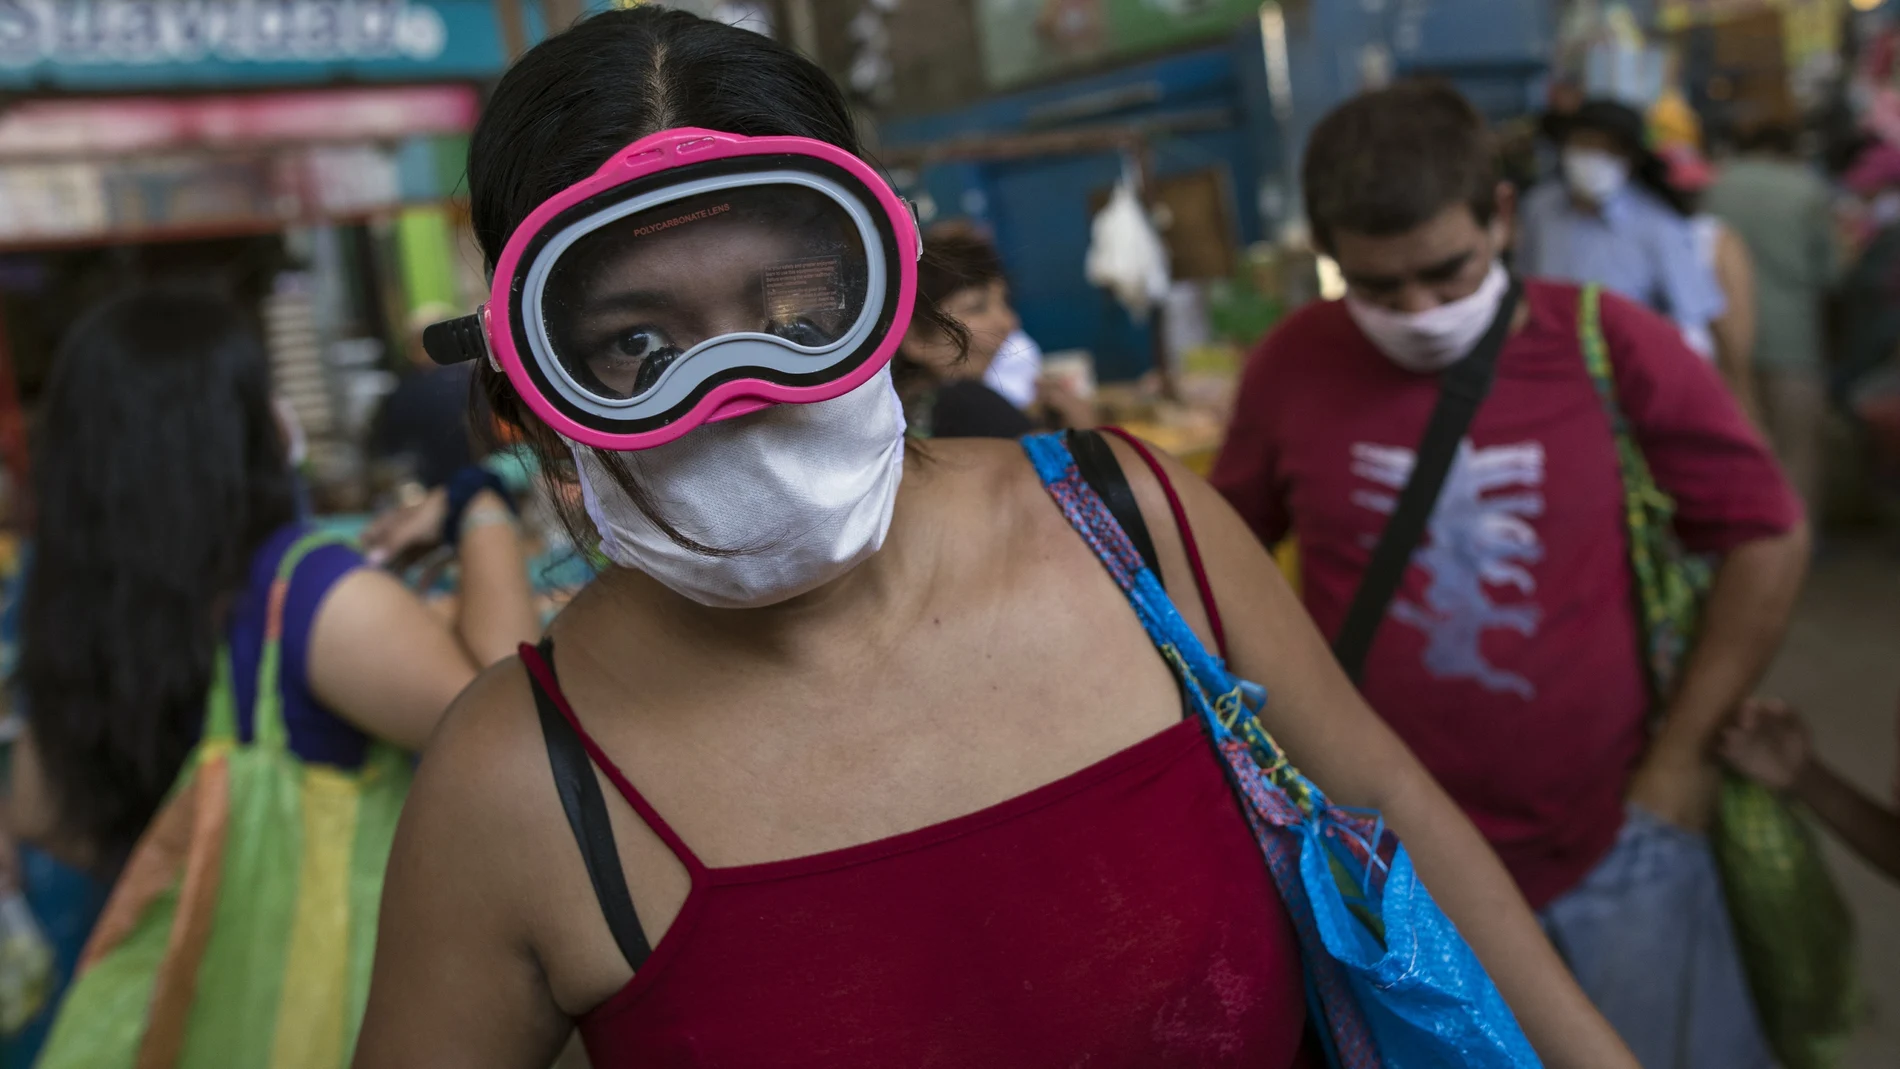 A woman wears a scuba and surgical mask amid the spread of the new coronavirus while shopping at a market in Lima, Peru, Monday, March 23, 2020. (AP Photo/Rodrigo Abd)